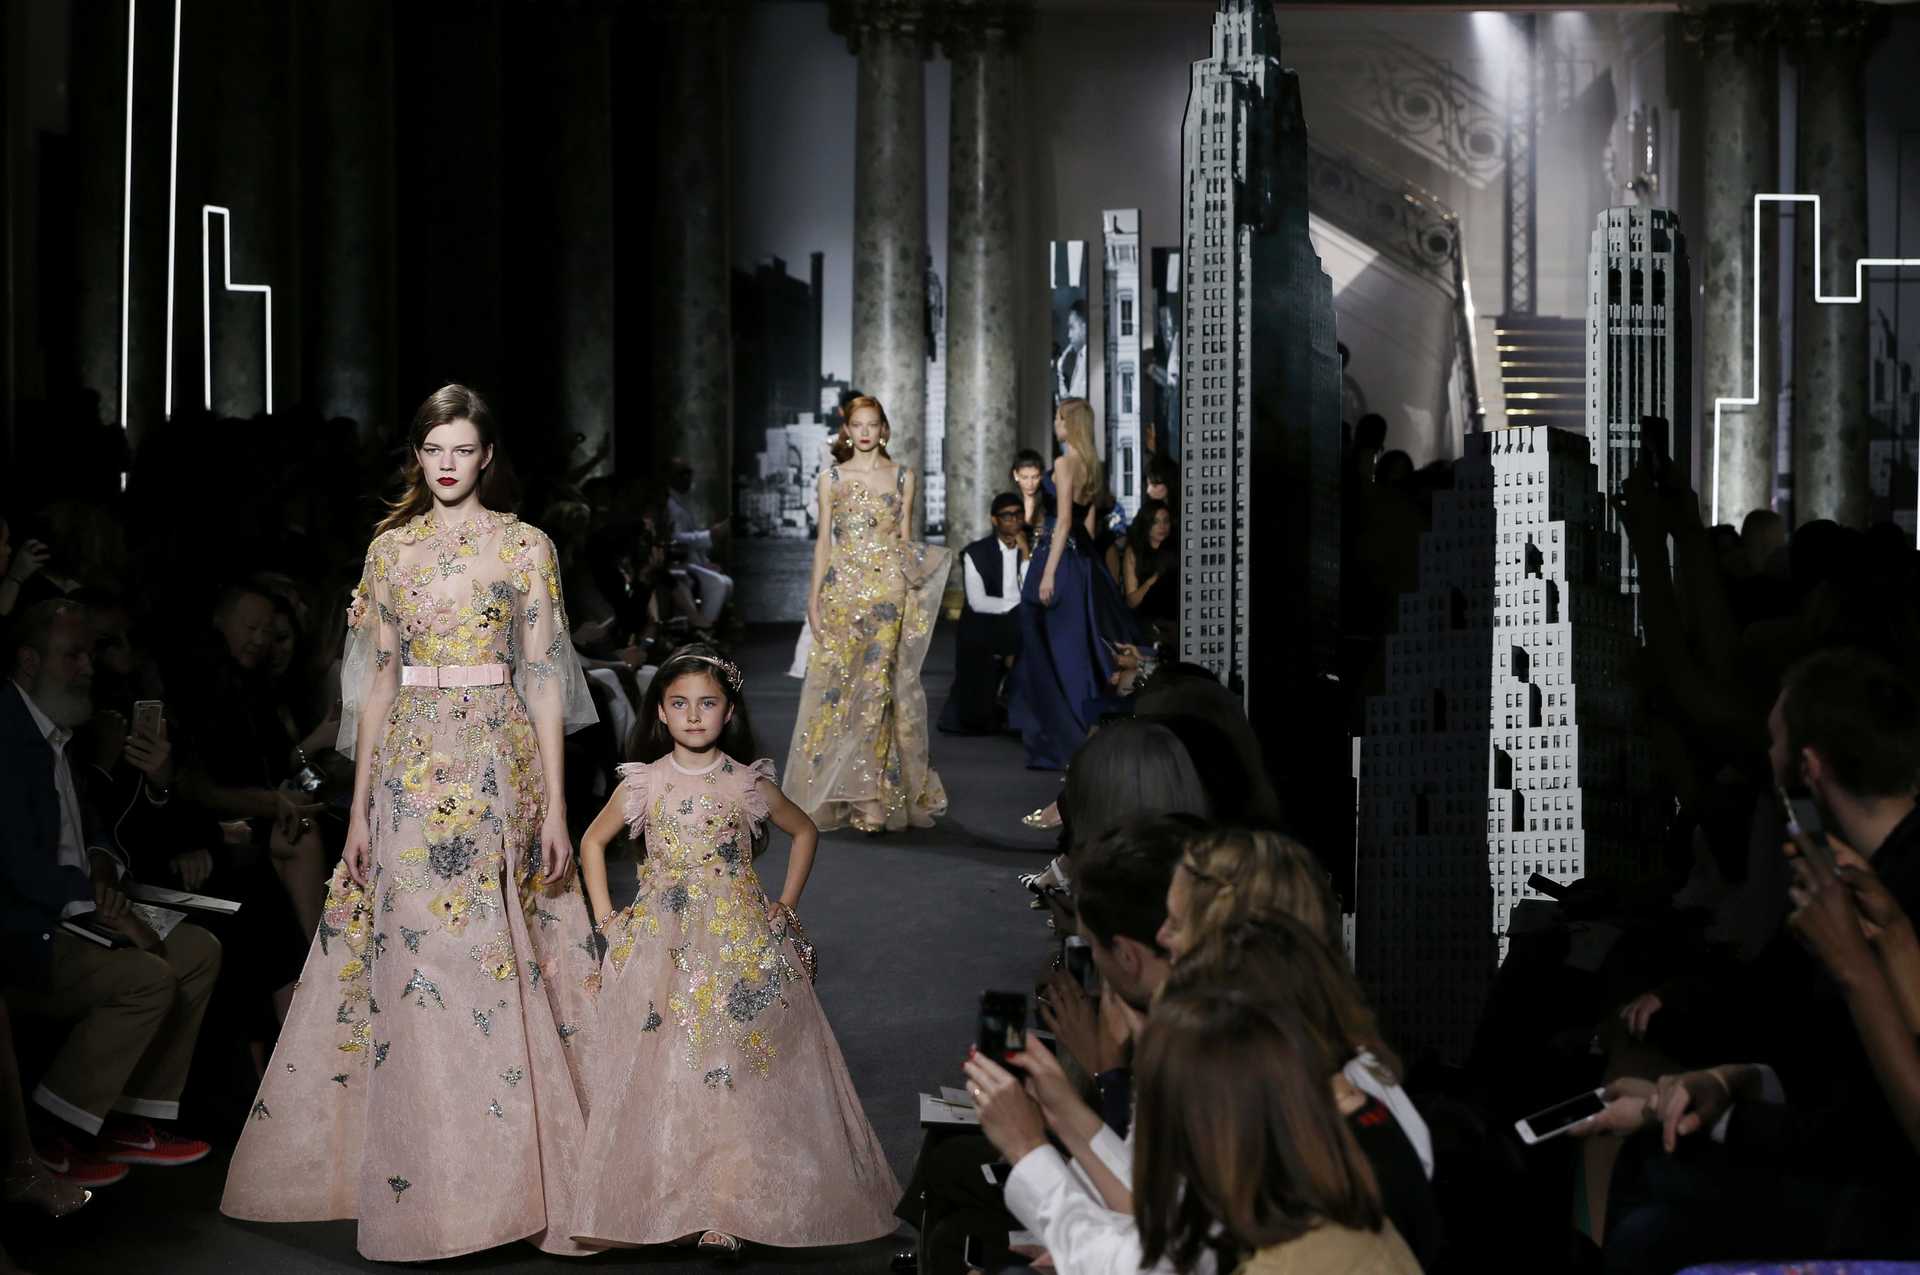 Models present creations by Lebanese designer Elie Saab as part of his Haute Couture Fall/Winter 2016/2017 collection in Paris